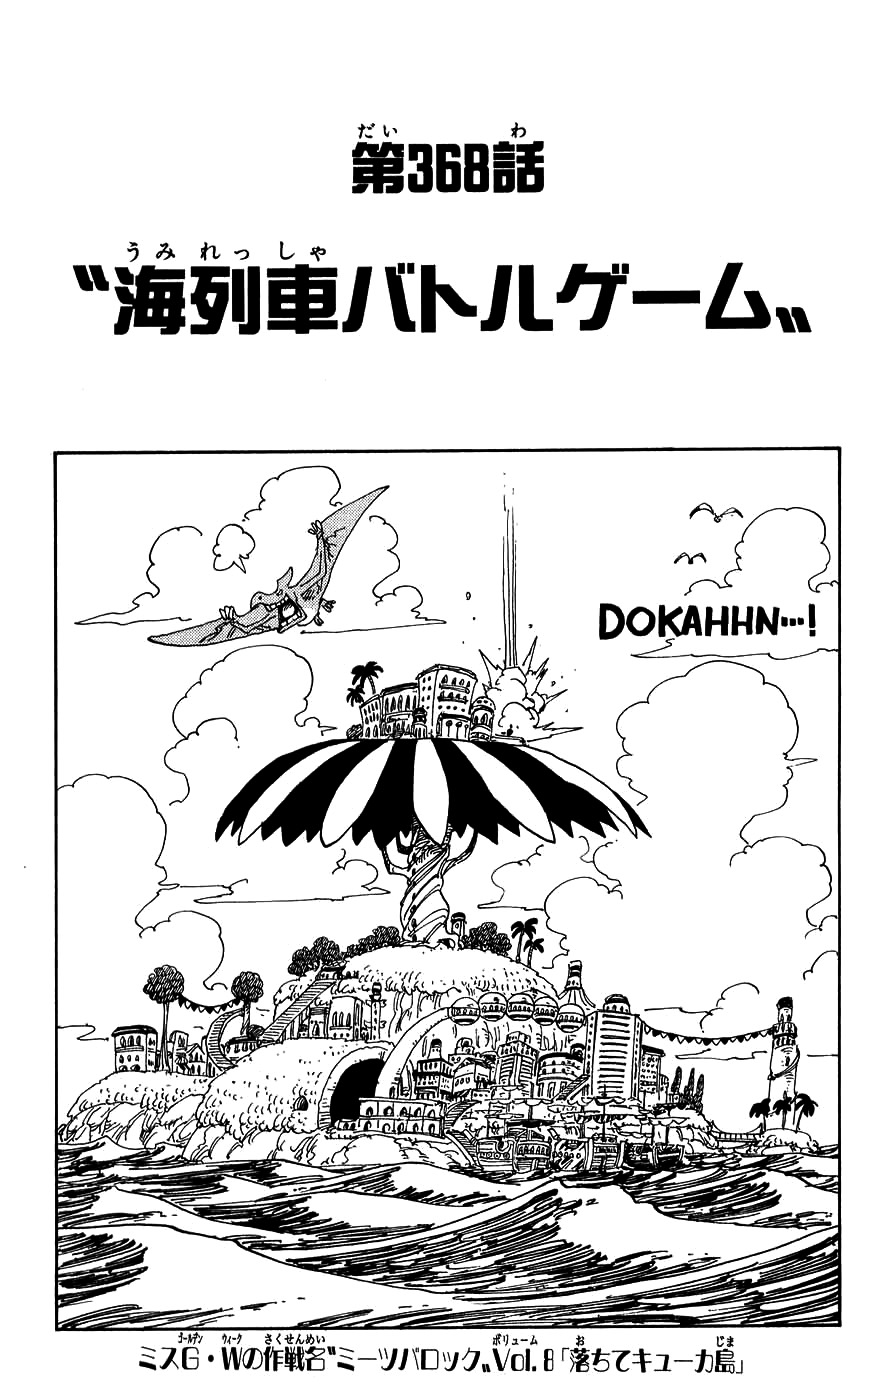 Spoiler - One Piece Chapter 1034 Spoilers Discussion, Page 368